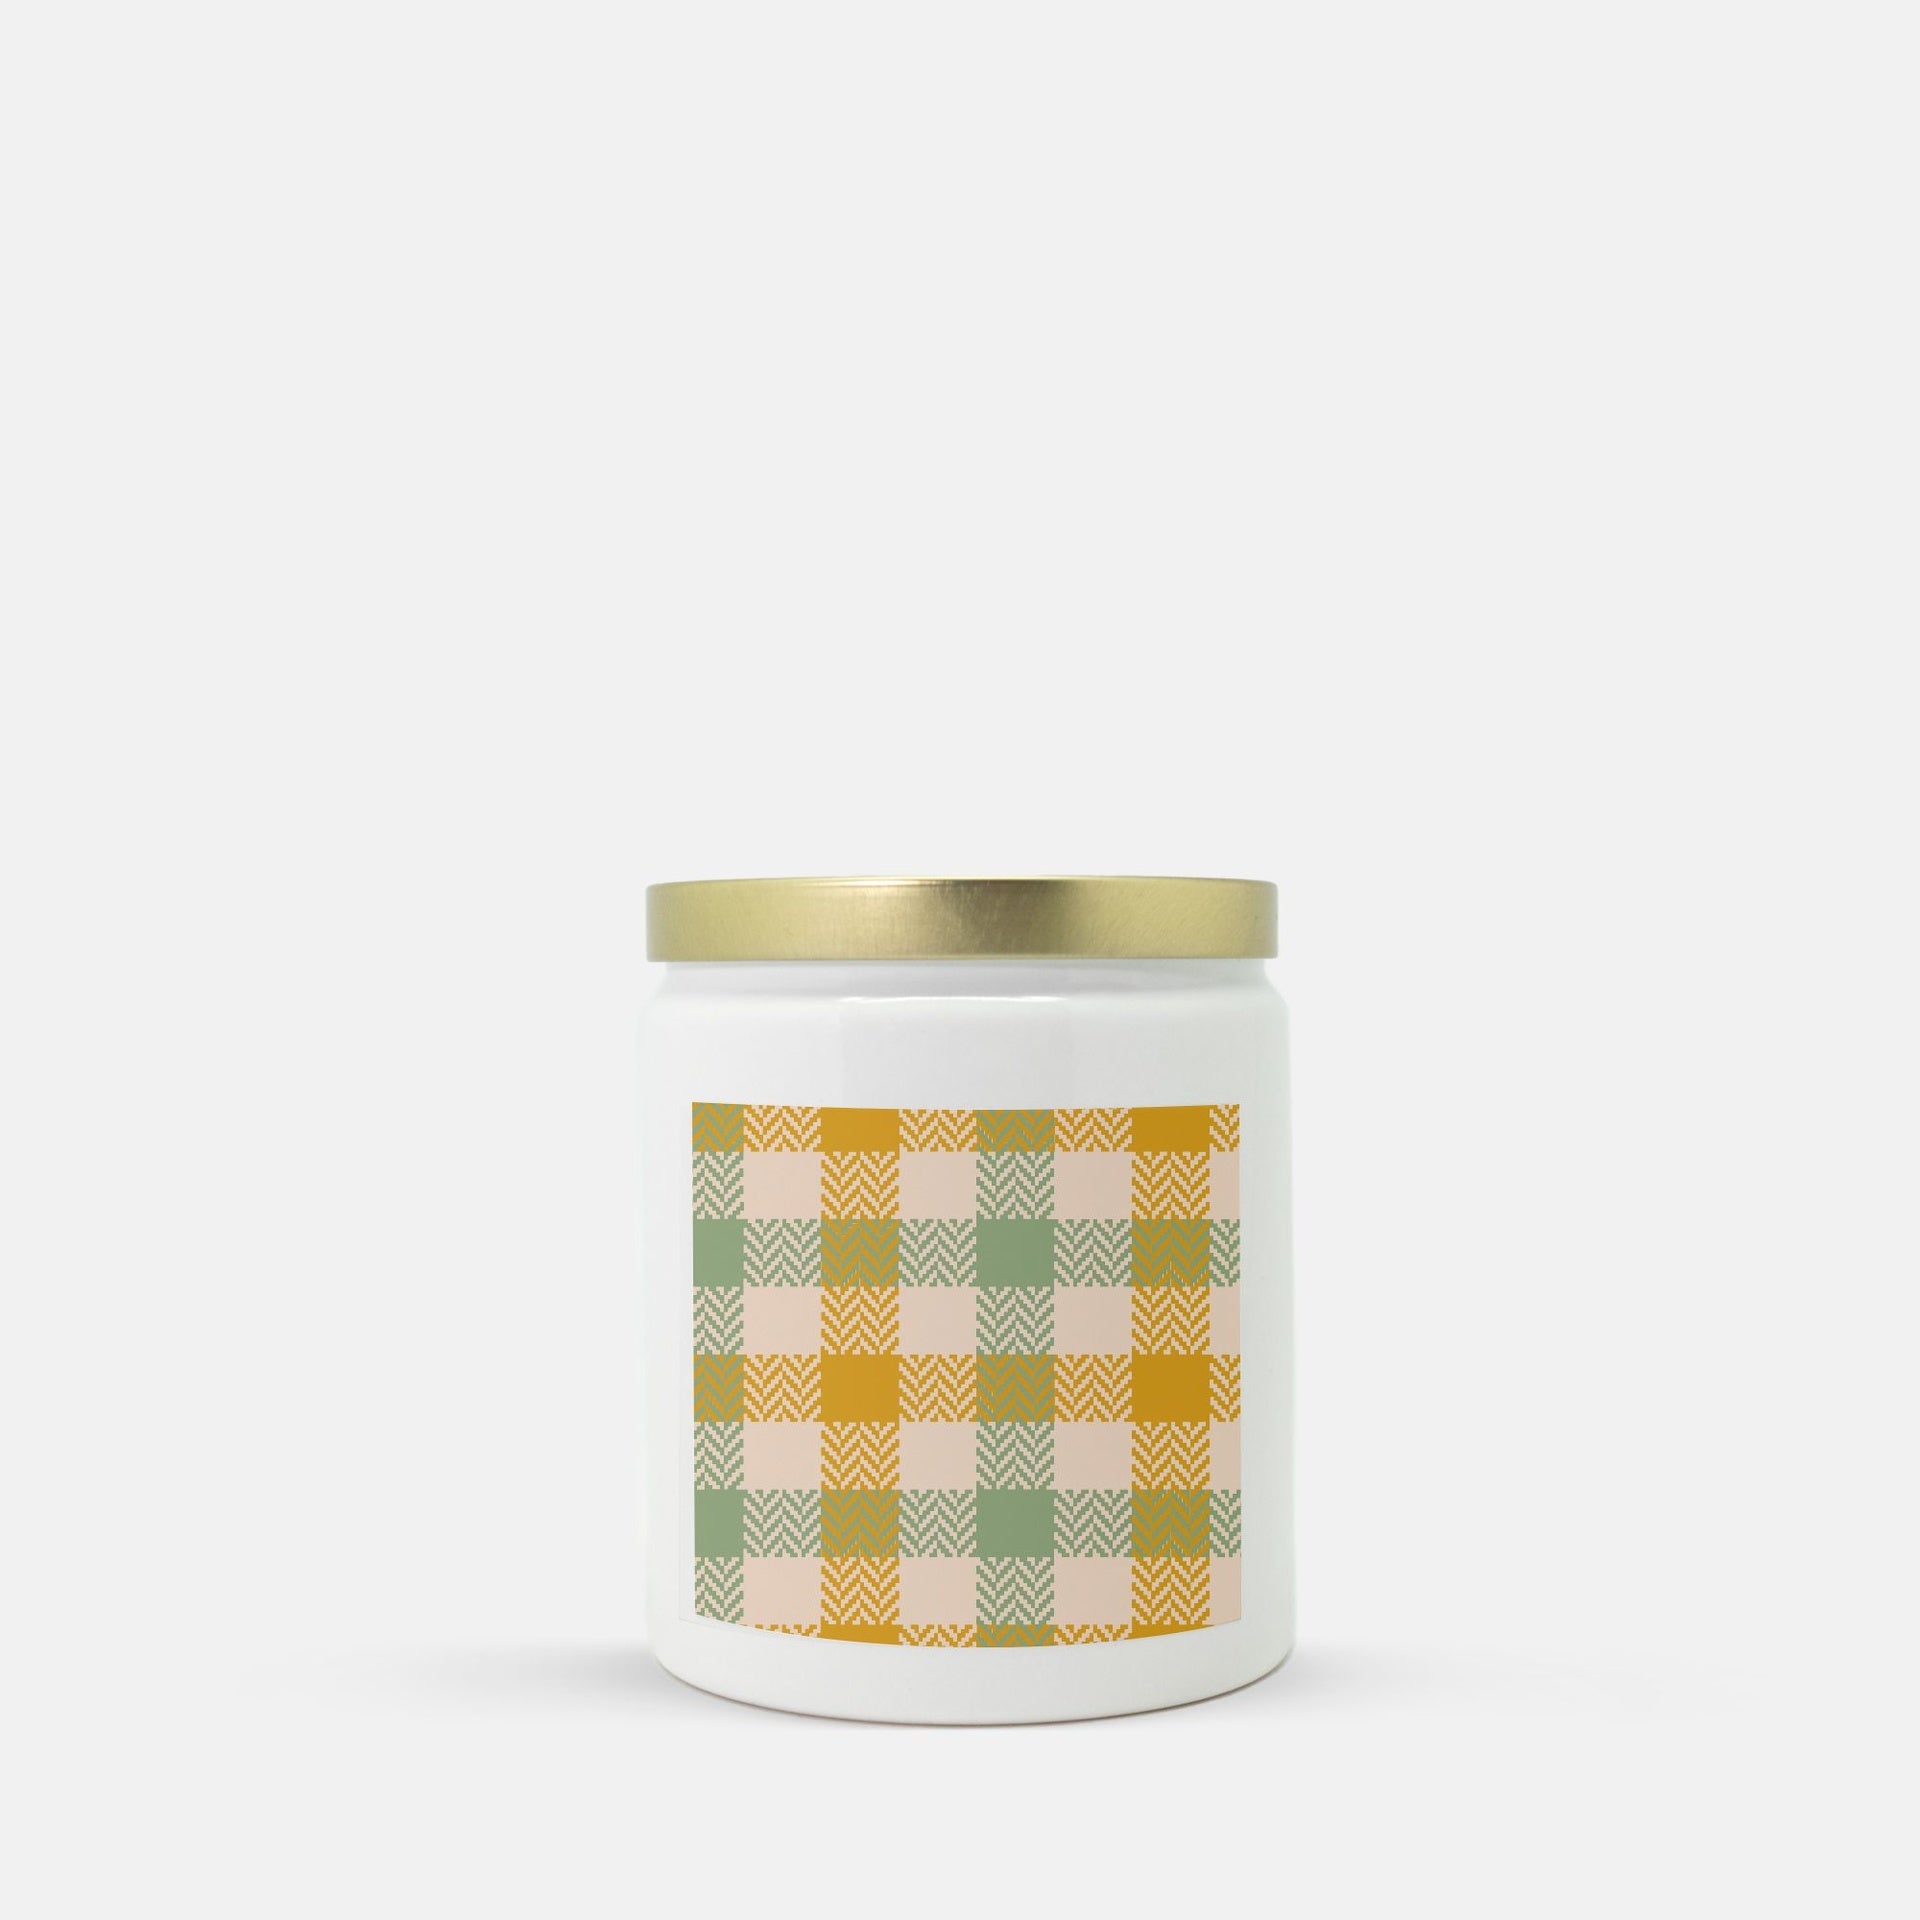 Lifestyle Details - Yellow & Green Plaid Ceramic Candle w Gold Lid - Macintosh